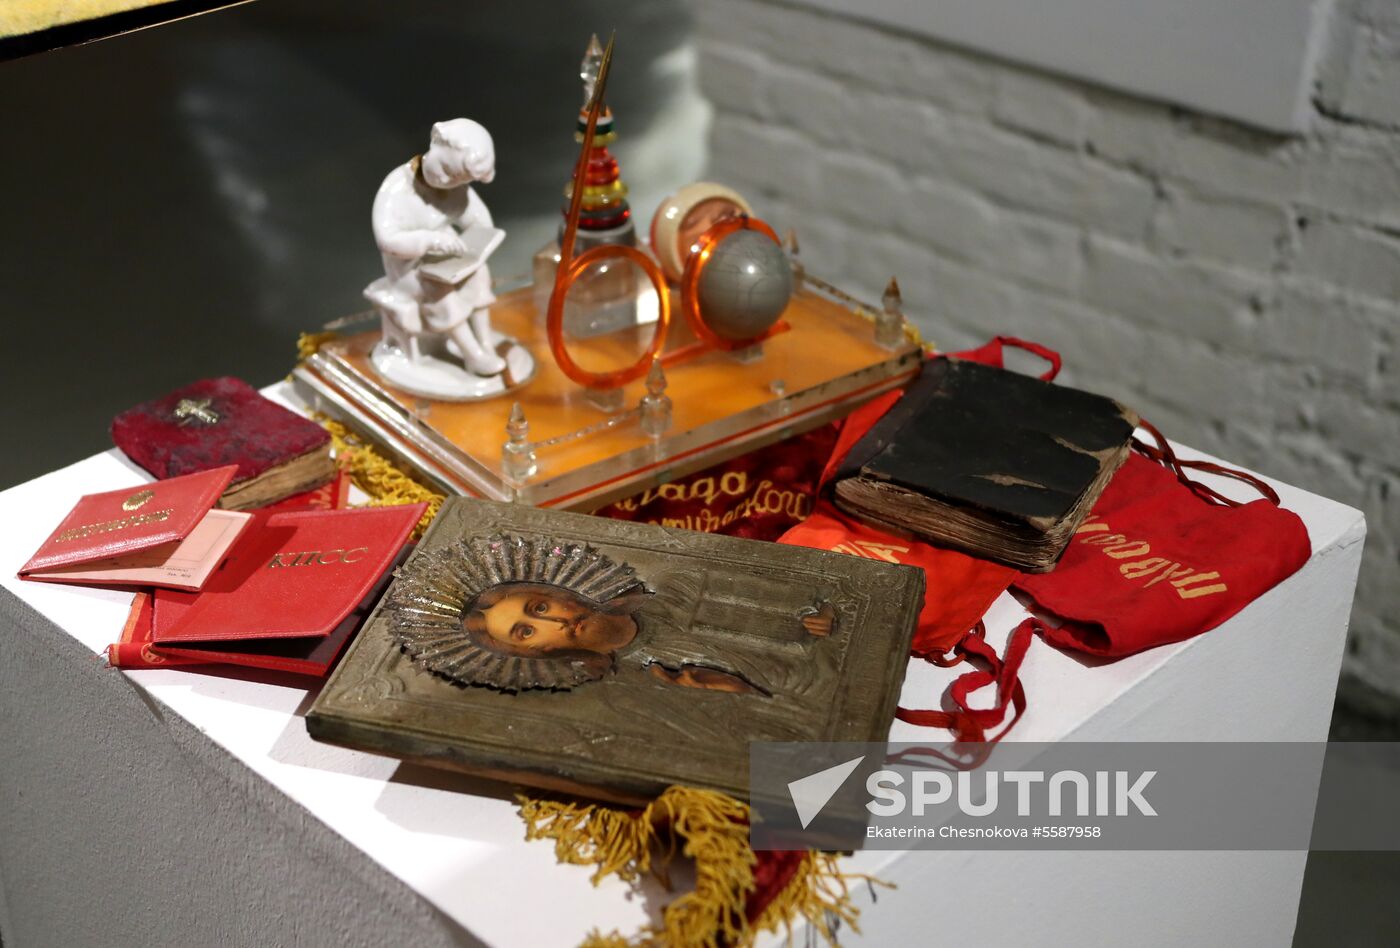 Exhibition project 'Petlyura's archeology' at Museum of Moscow